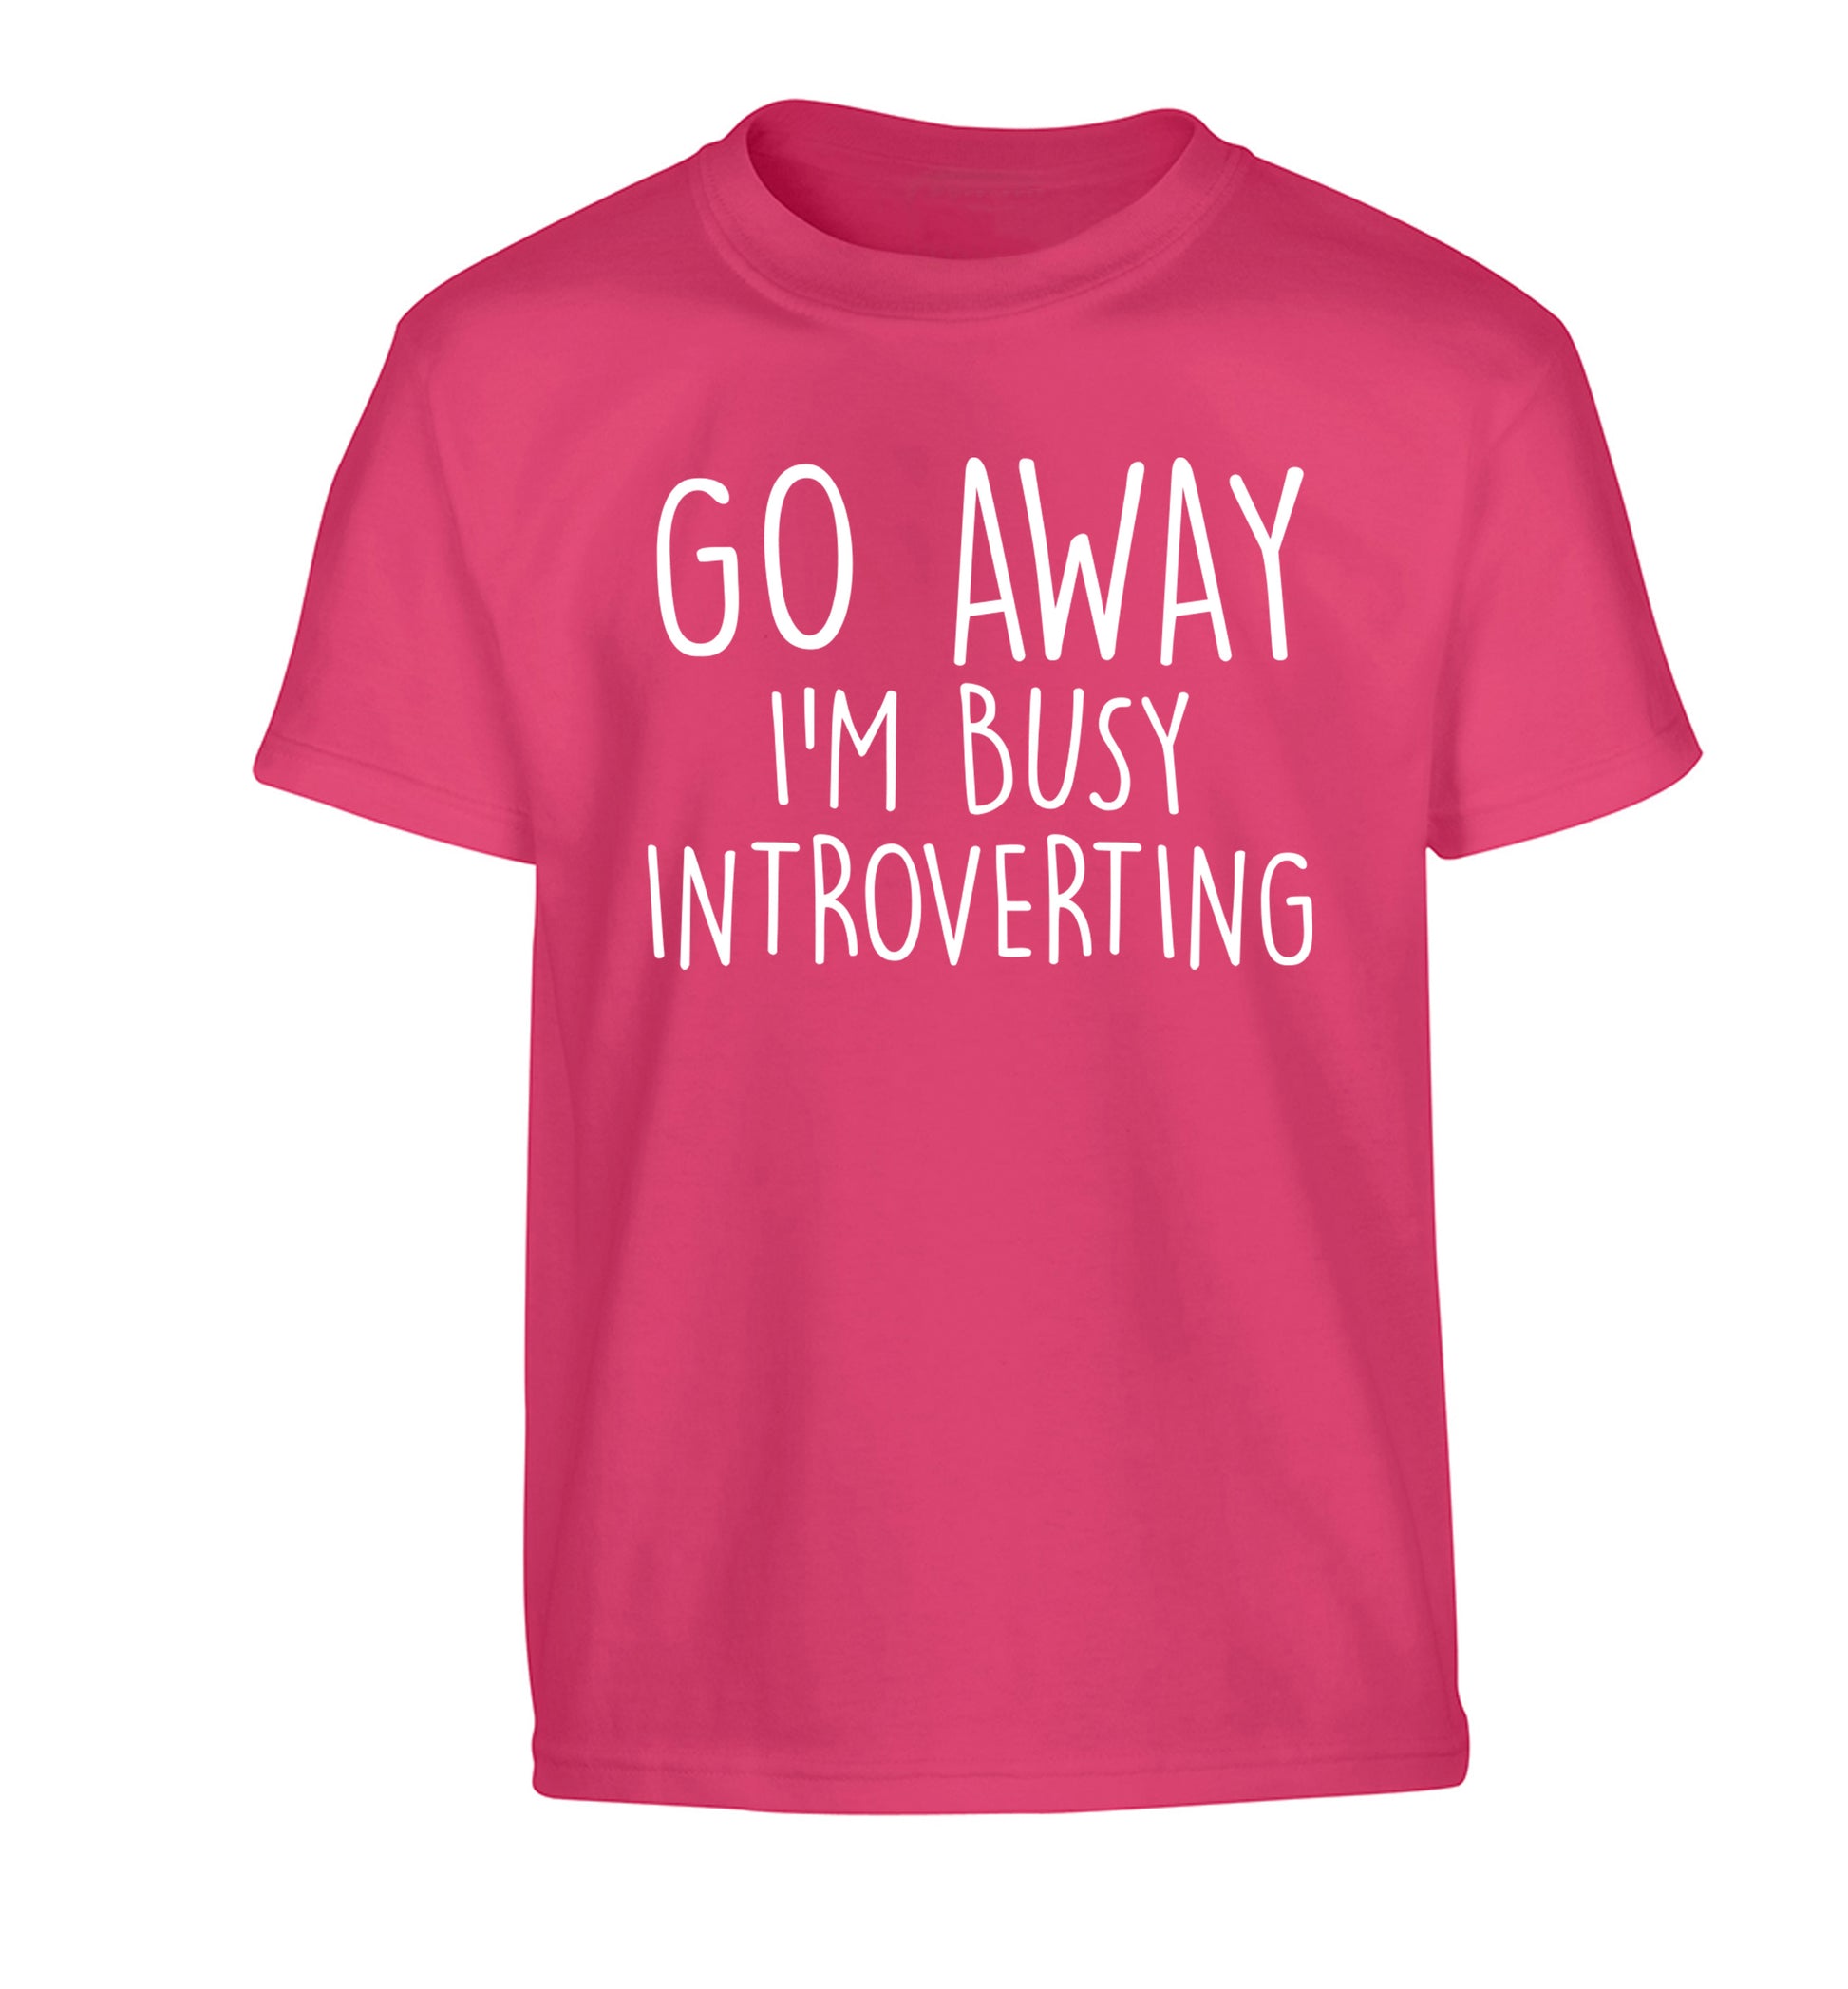 Go away I'm busy introverting Children's pink Tshirt 12-13 Years